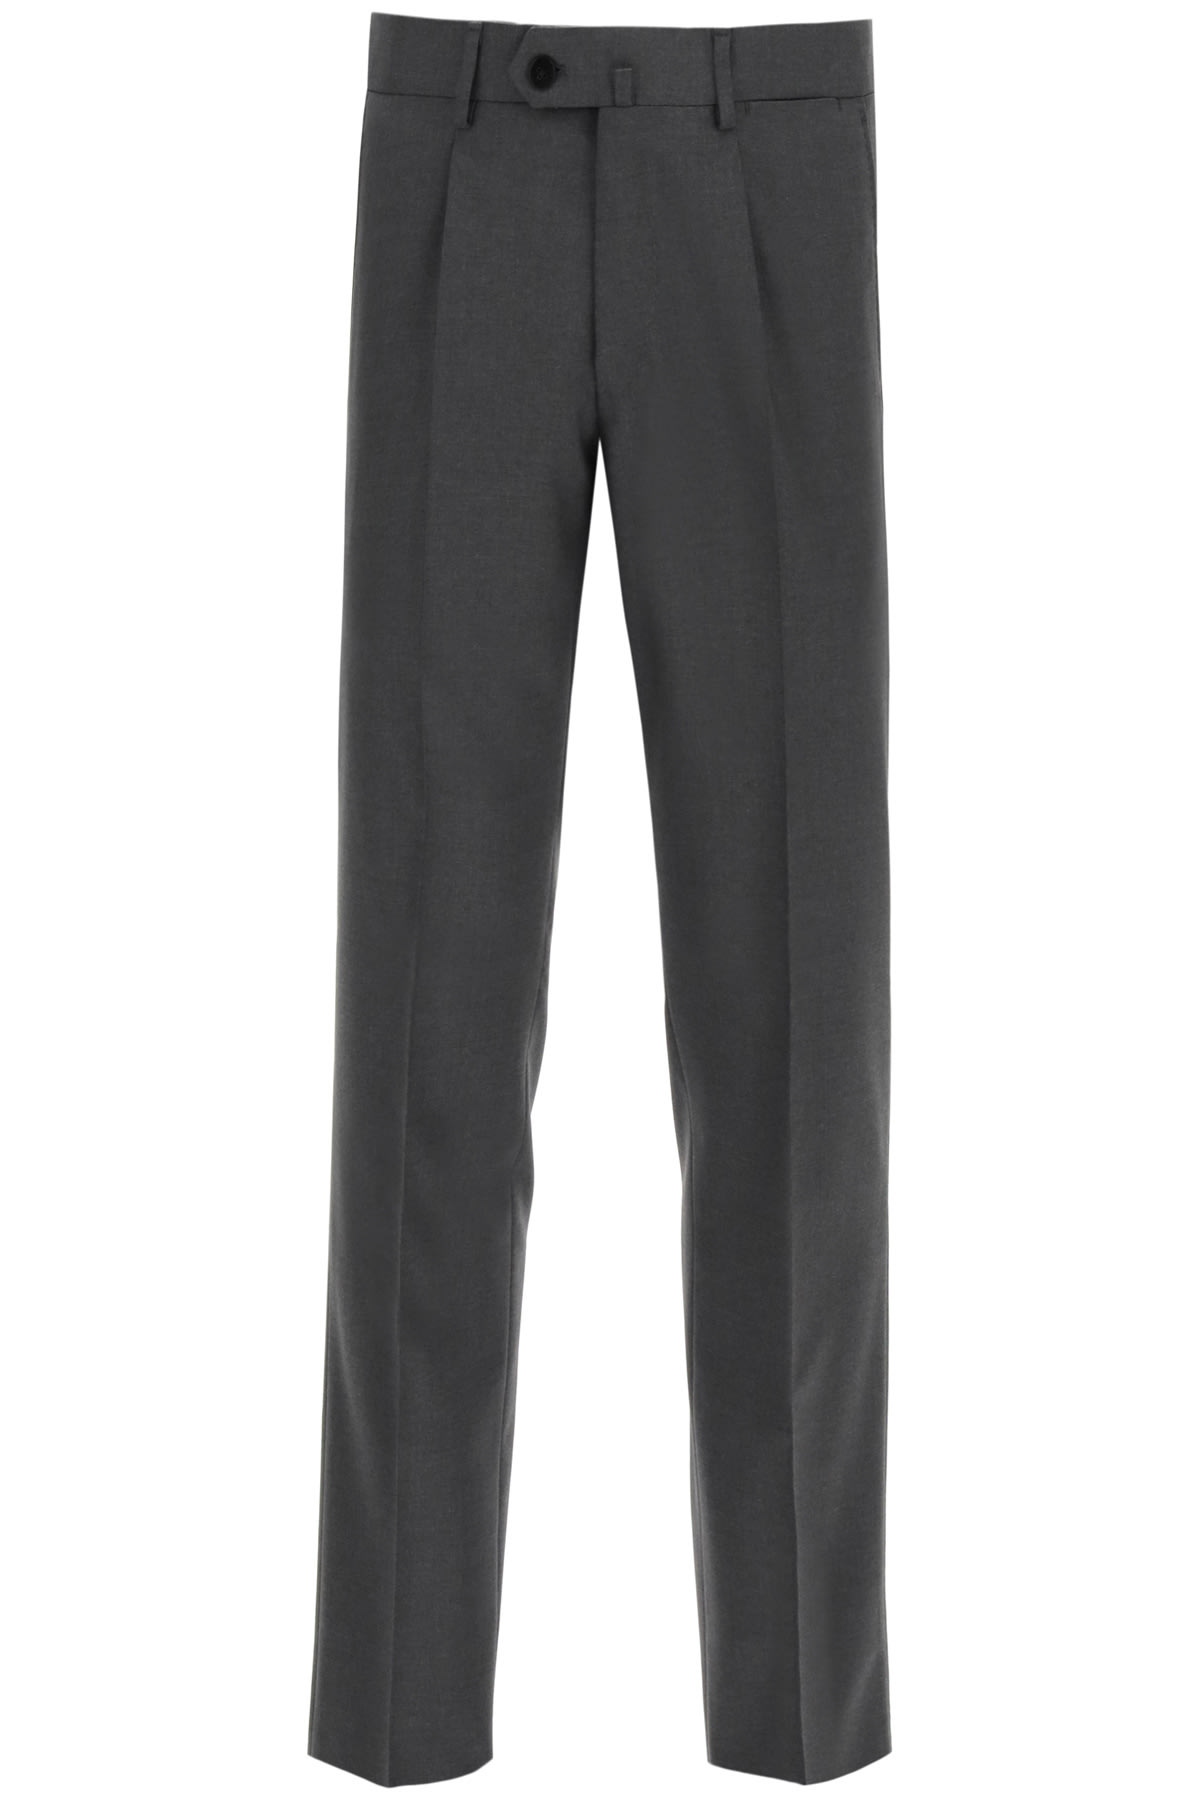 Caruso Classic Wool Trousers